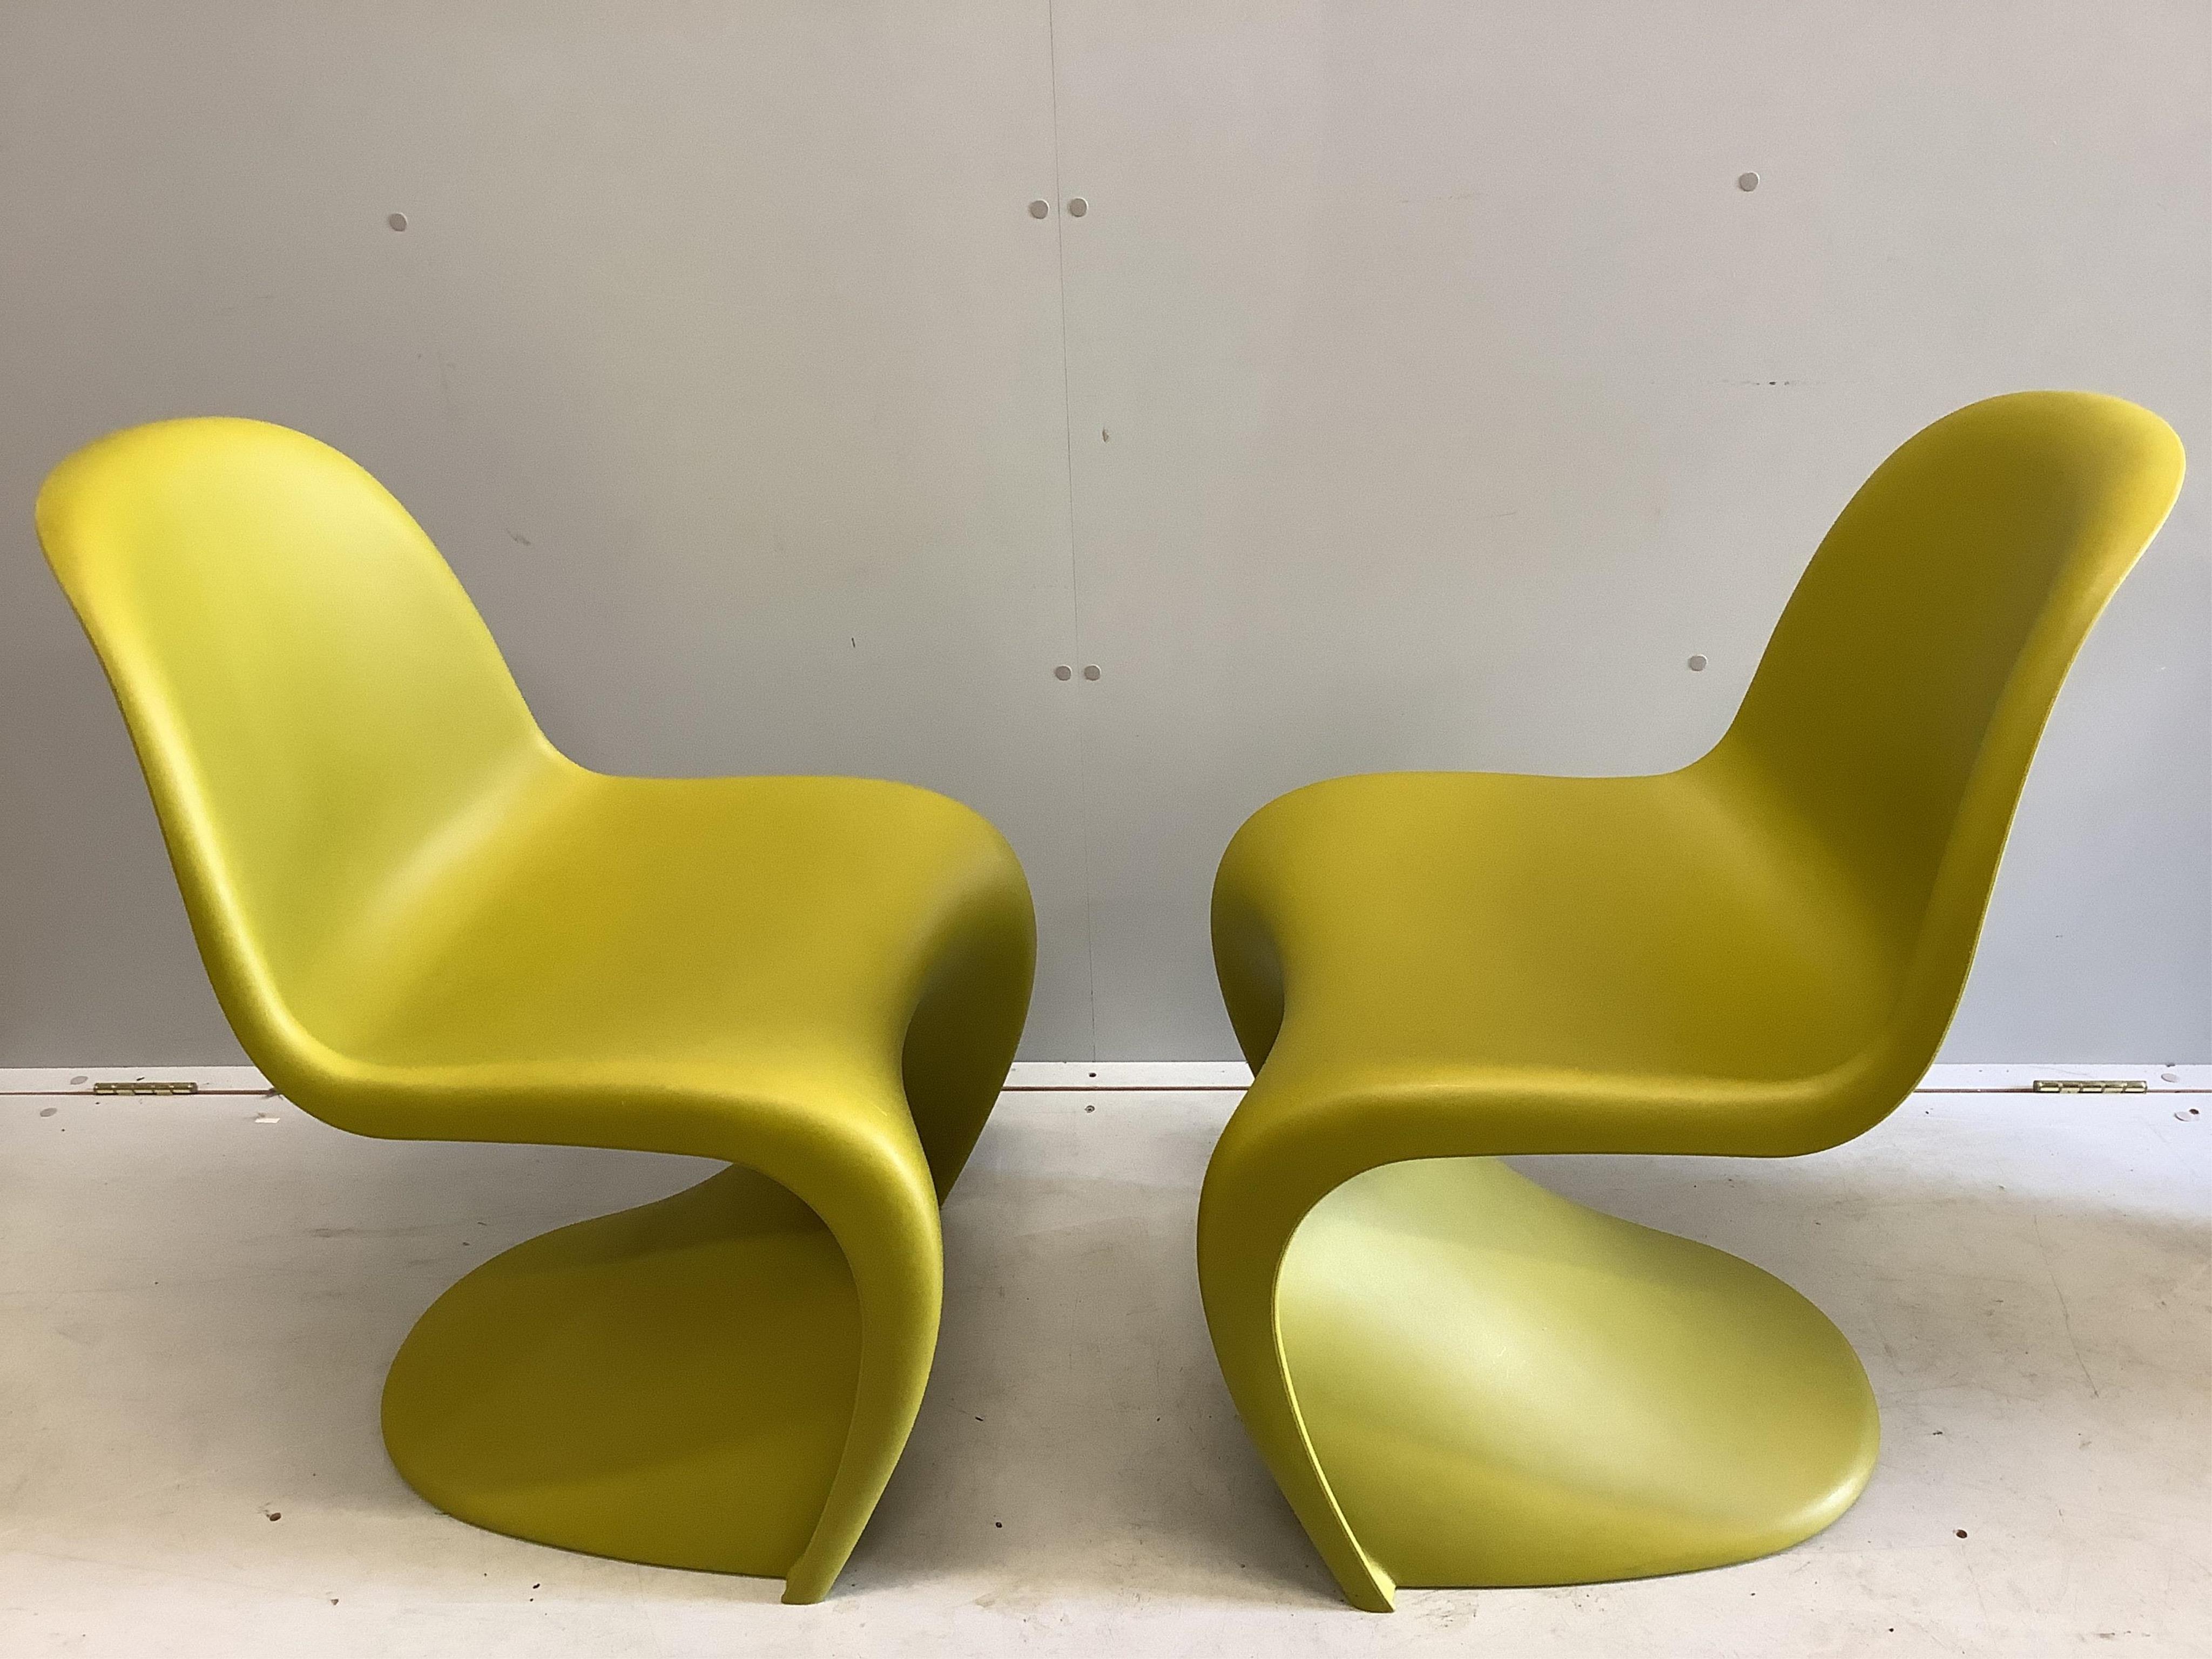 Two moulded plastic chairs by Verner Panton for Vitra, width 48cm, depth 58cm, height 82cm